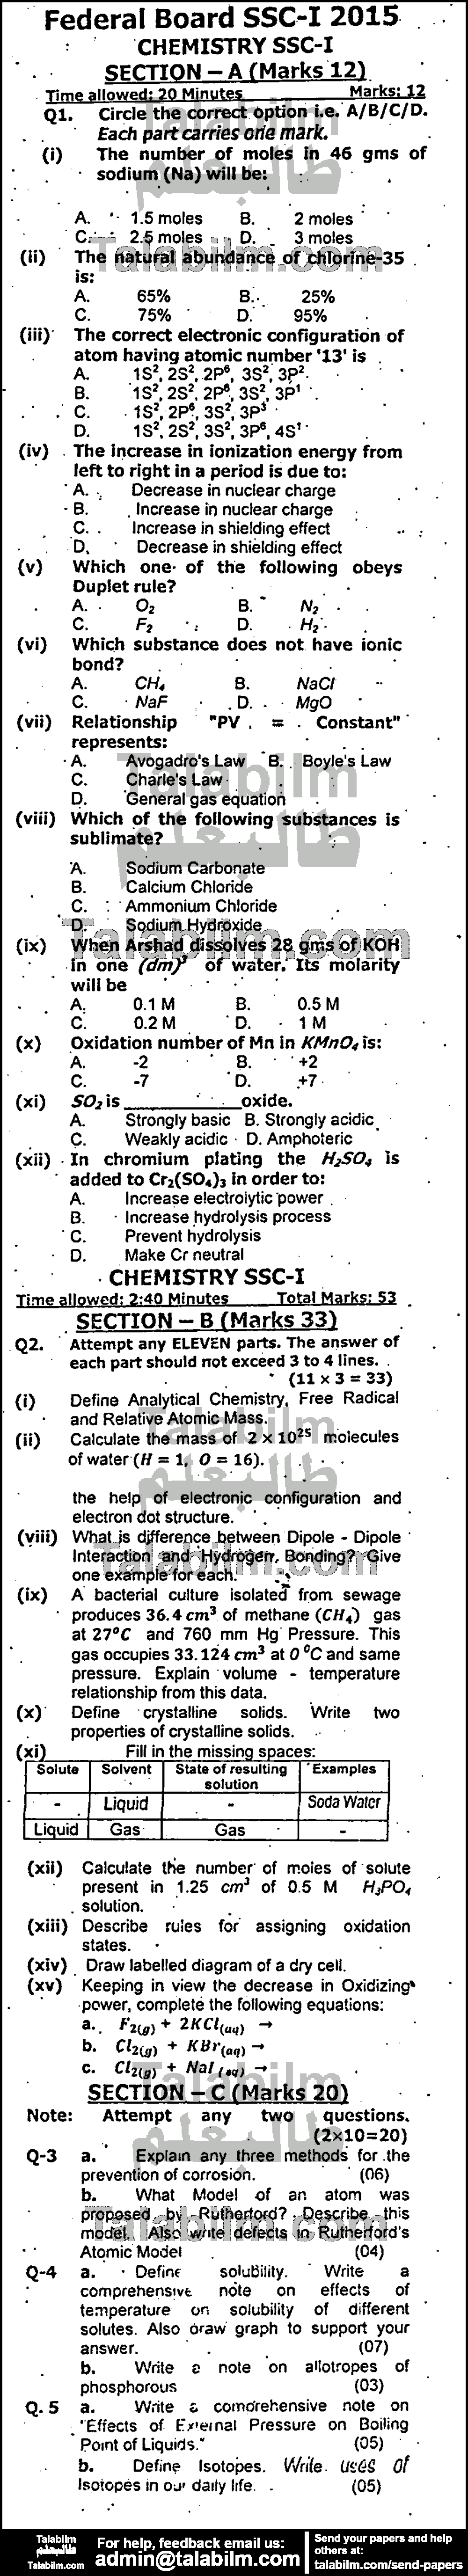 Chemistry 0 past paper for 2015 Group-I